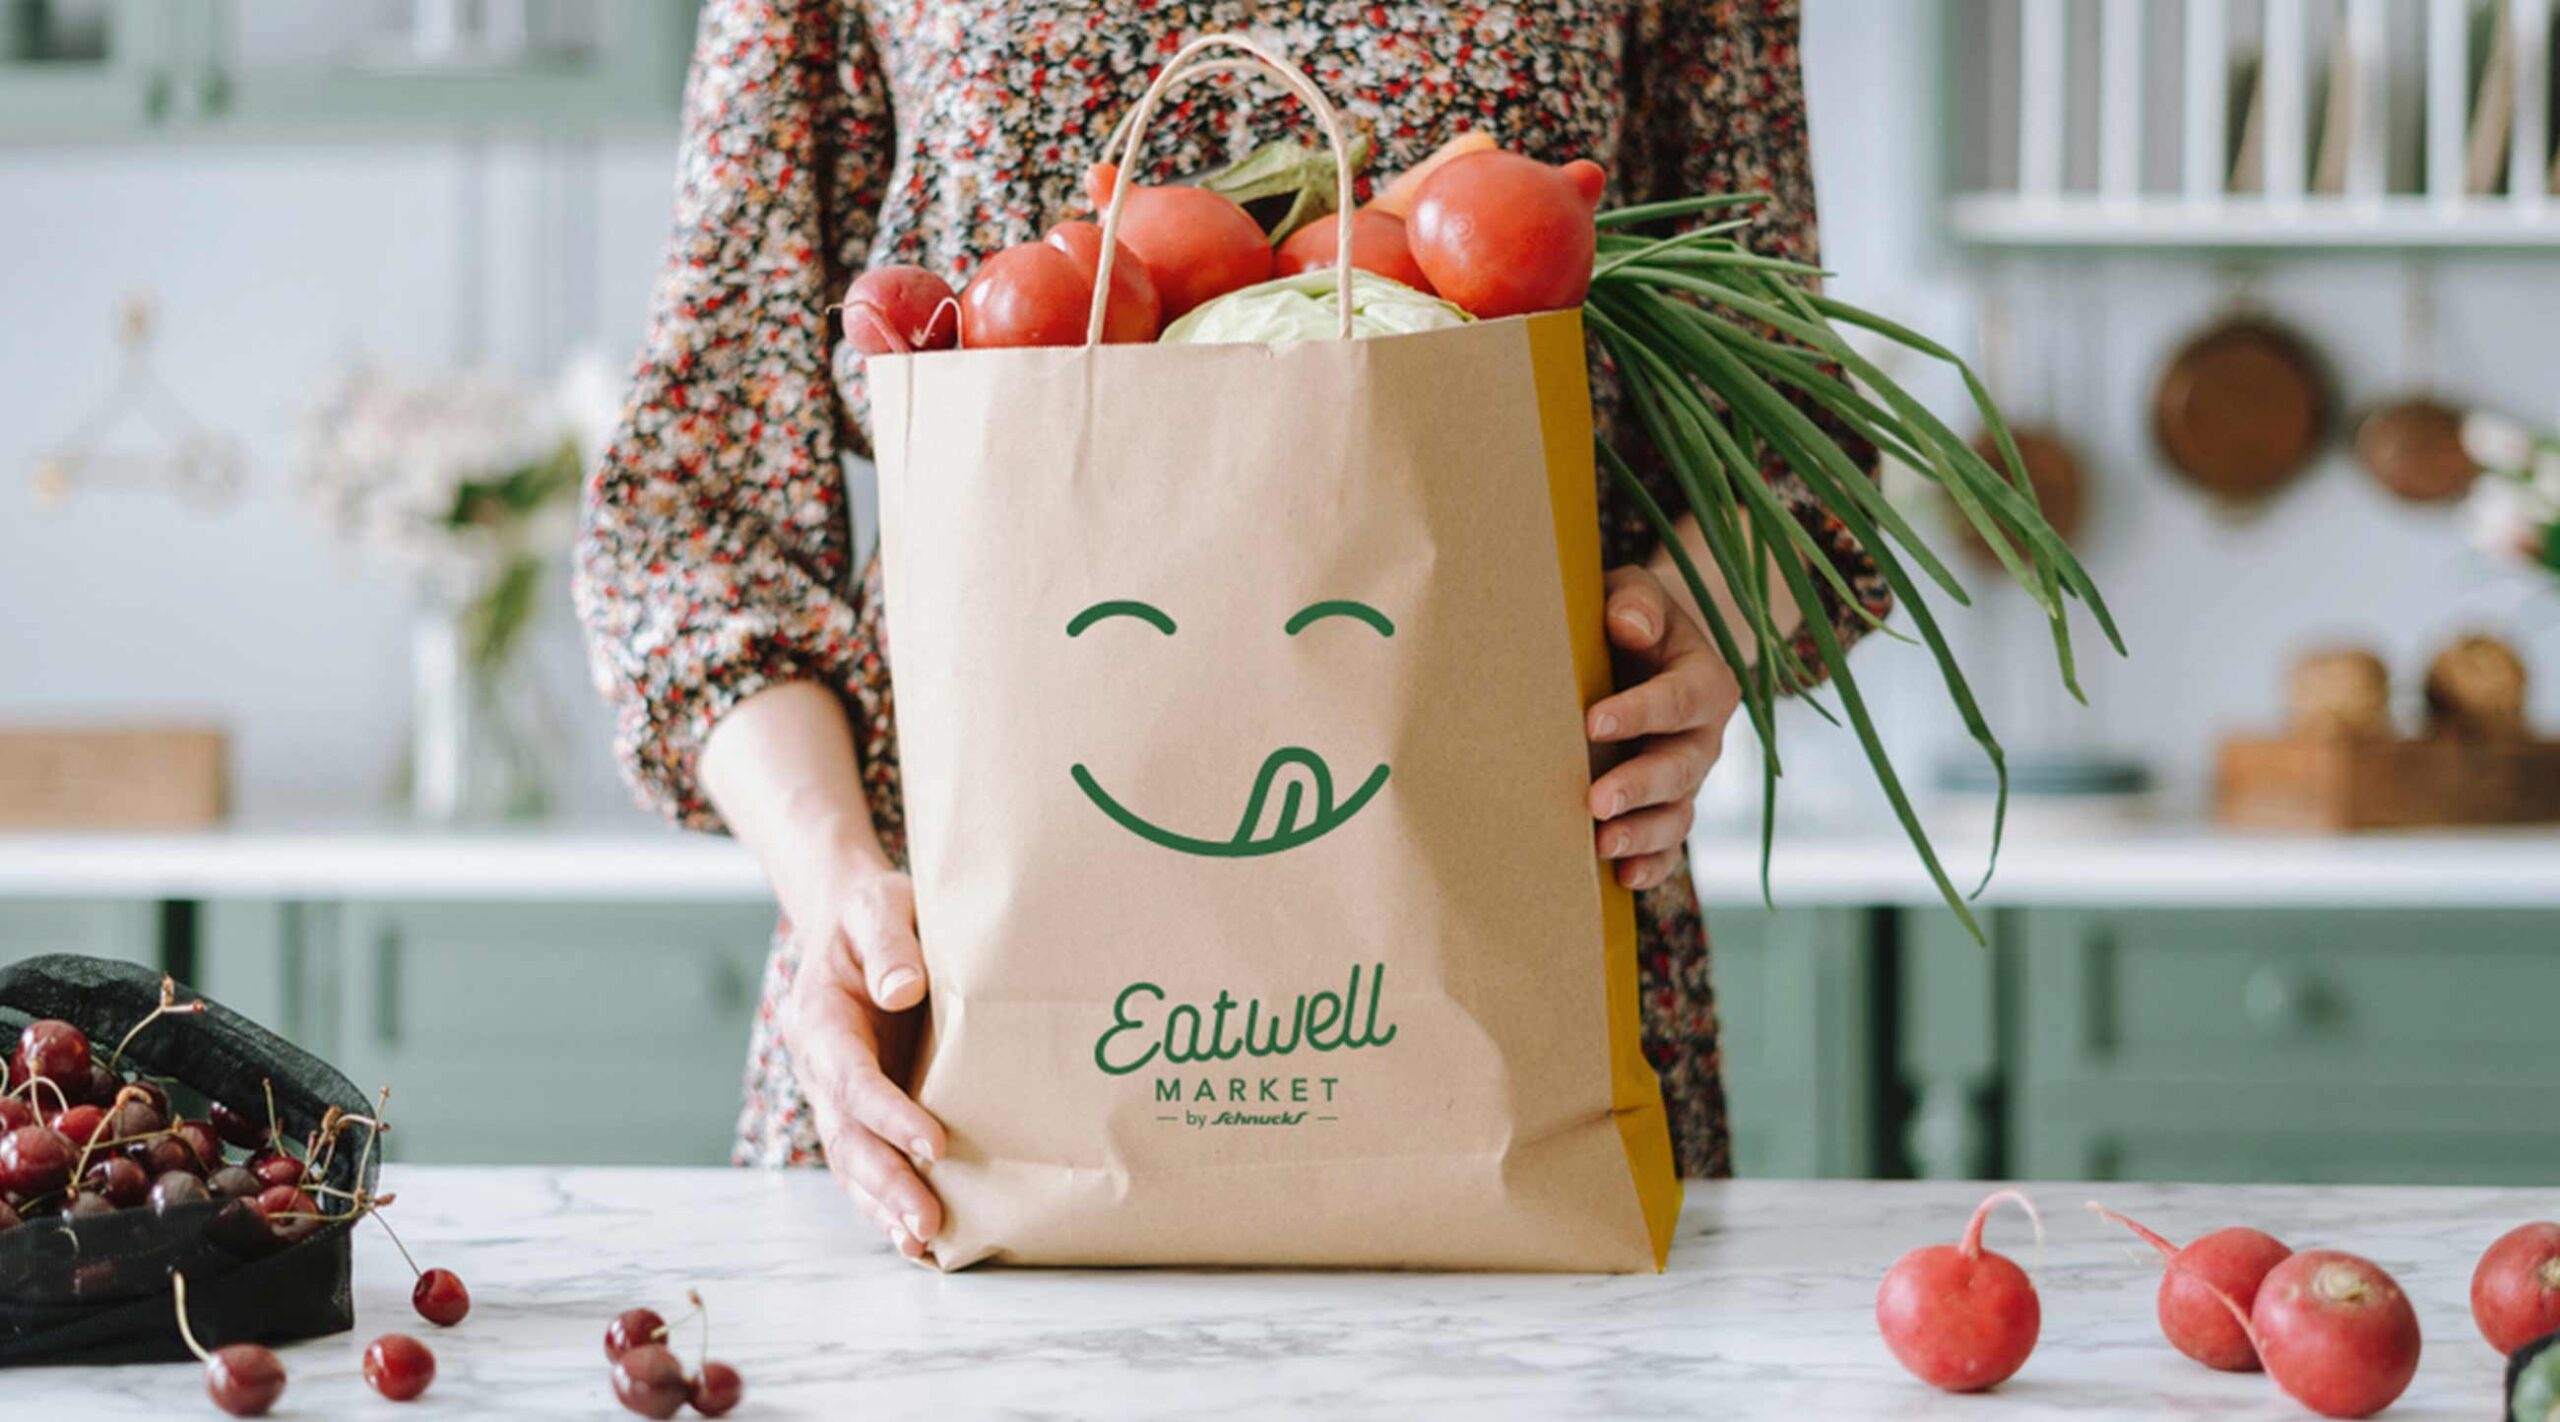 A person places an Eatwell Markets-branded paper grocery bag on the kitchen counter